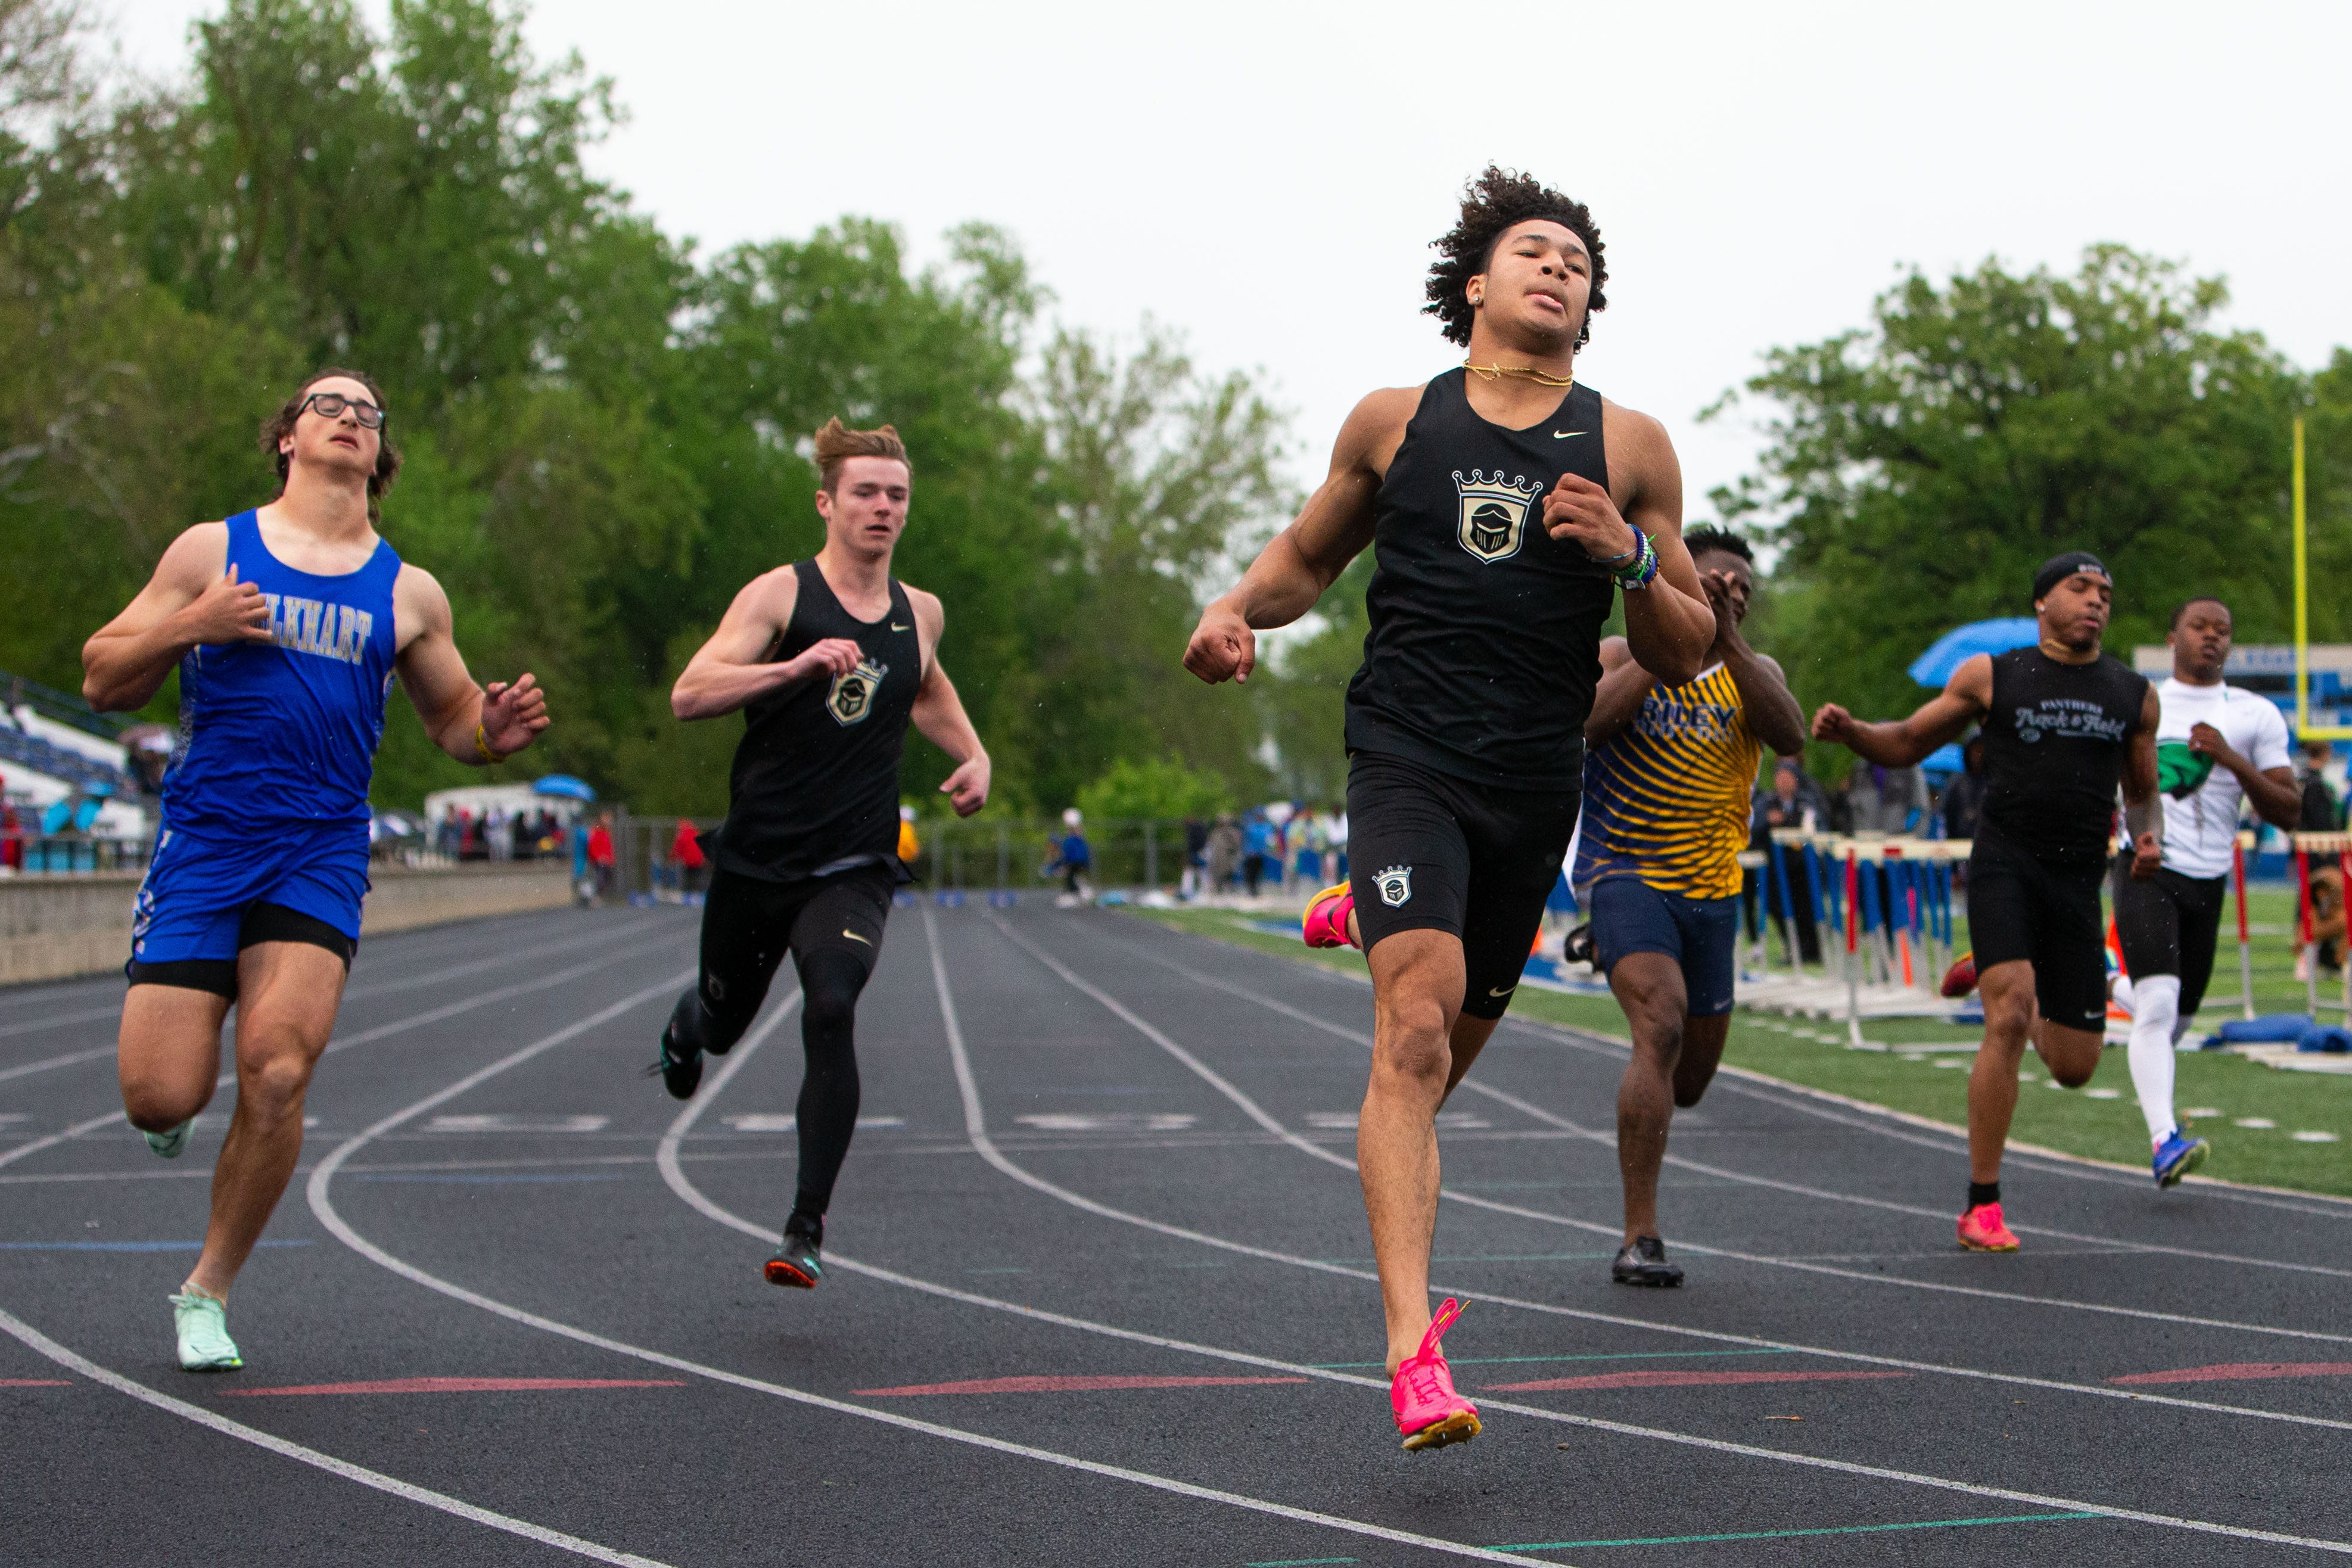 'He's just a stud.' With Watson out, Coker takes the spotlight for Penn boys track in NIC